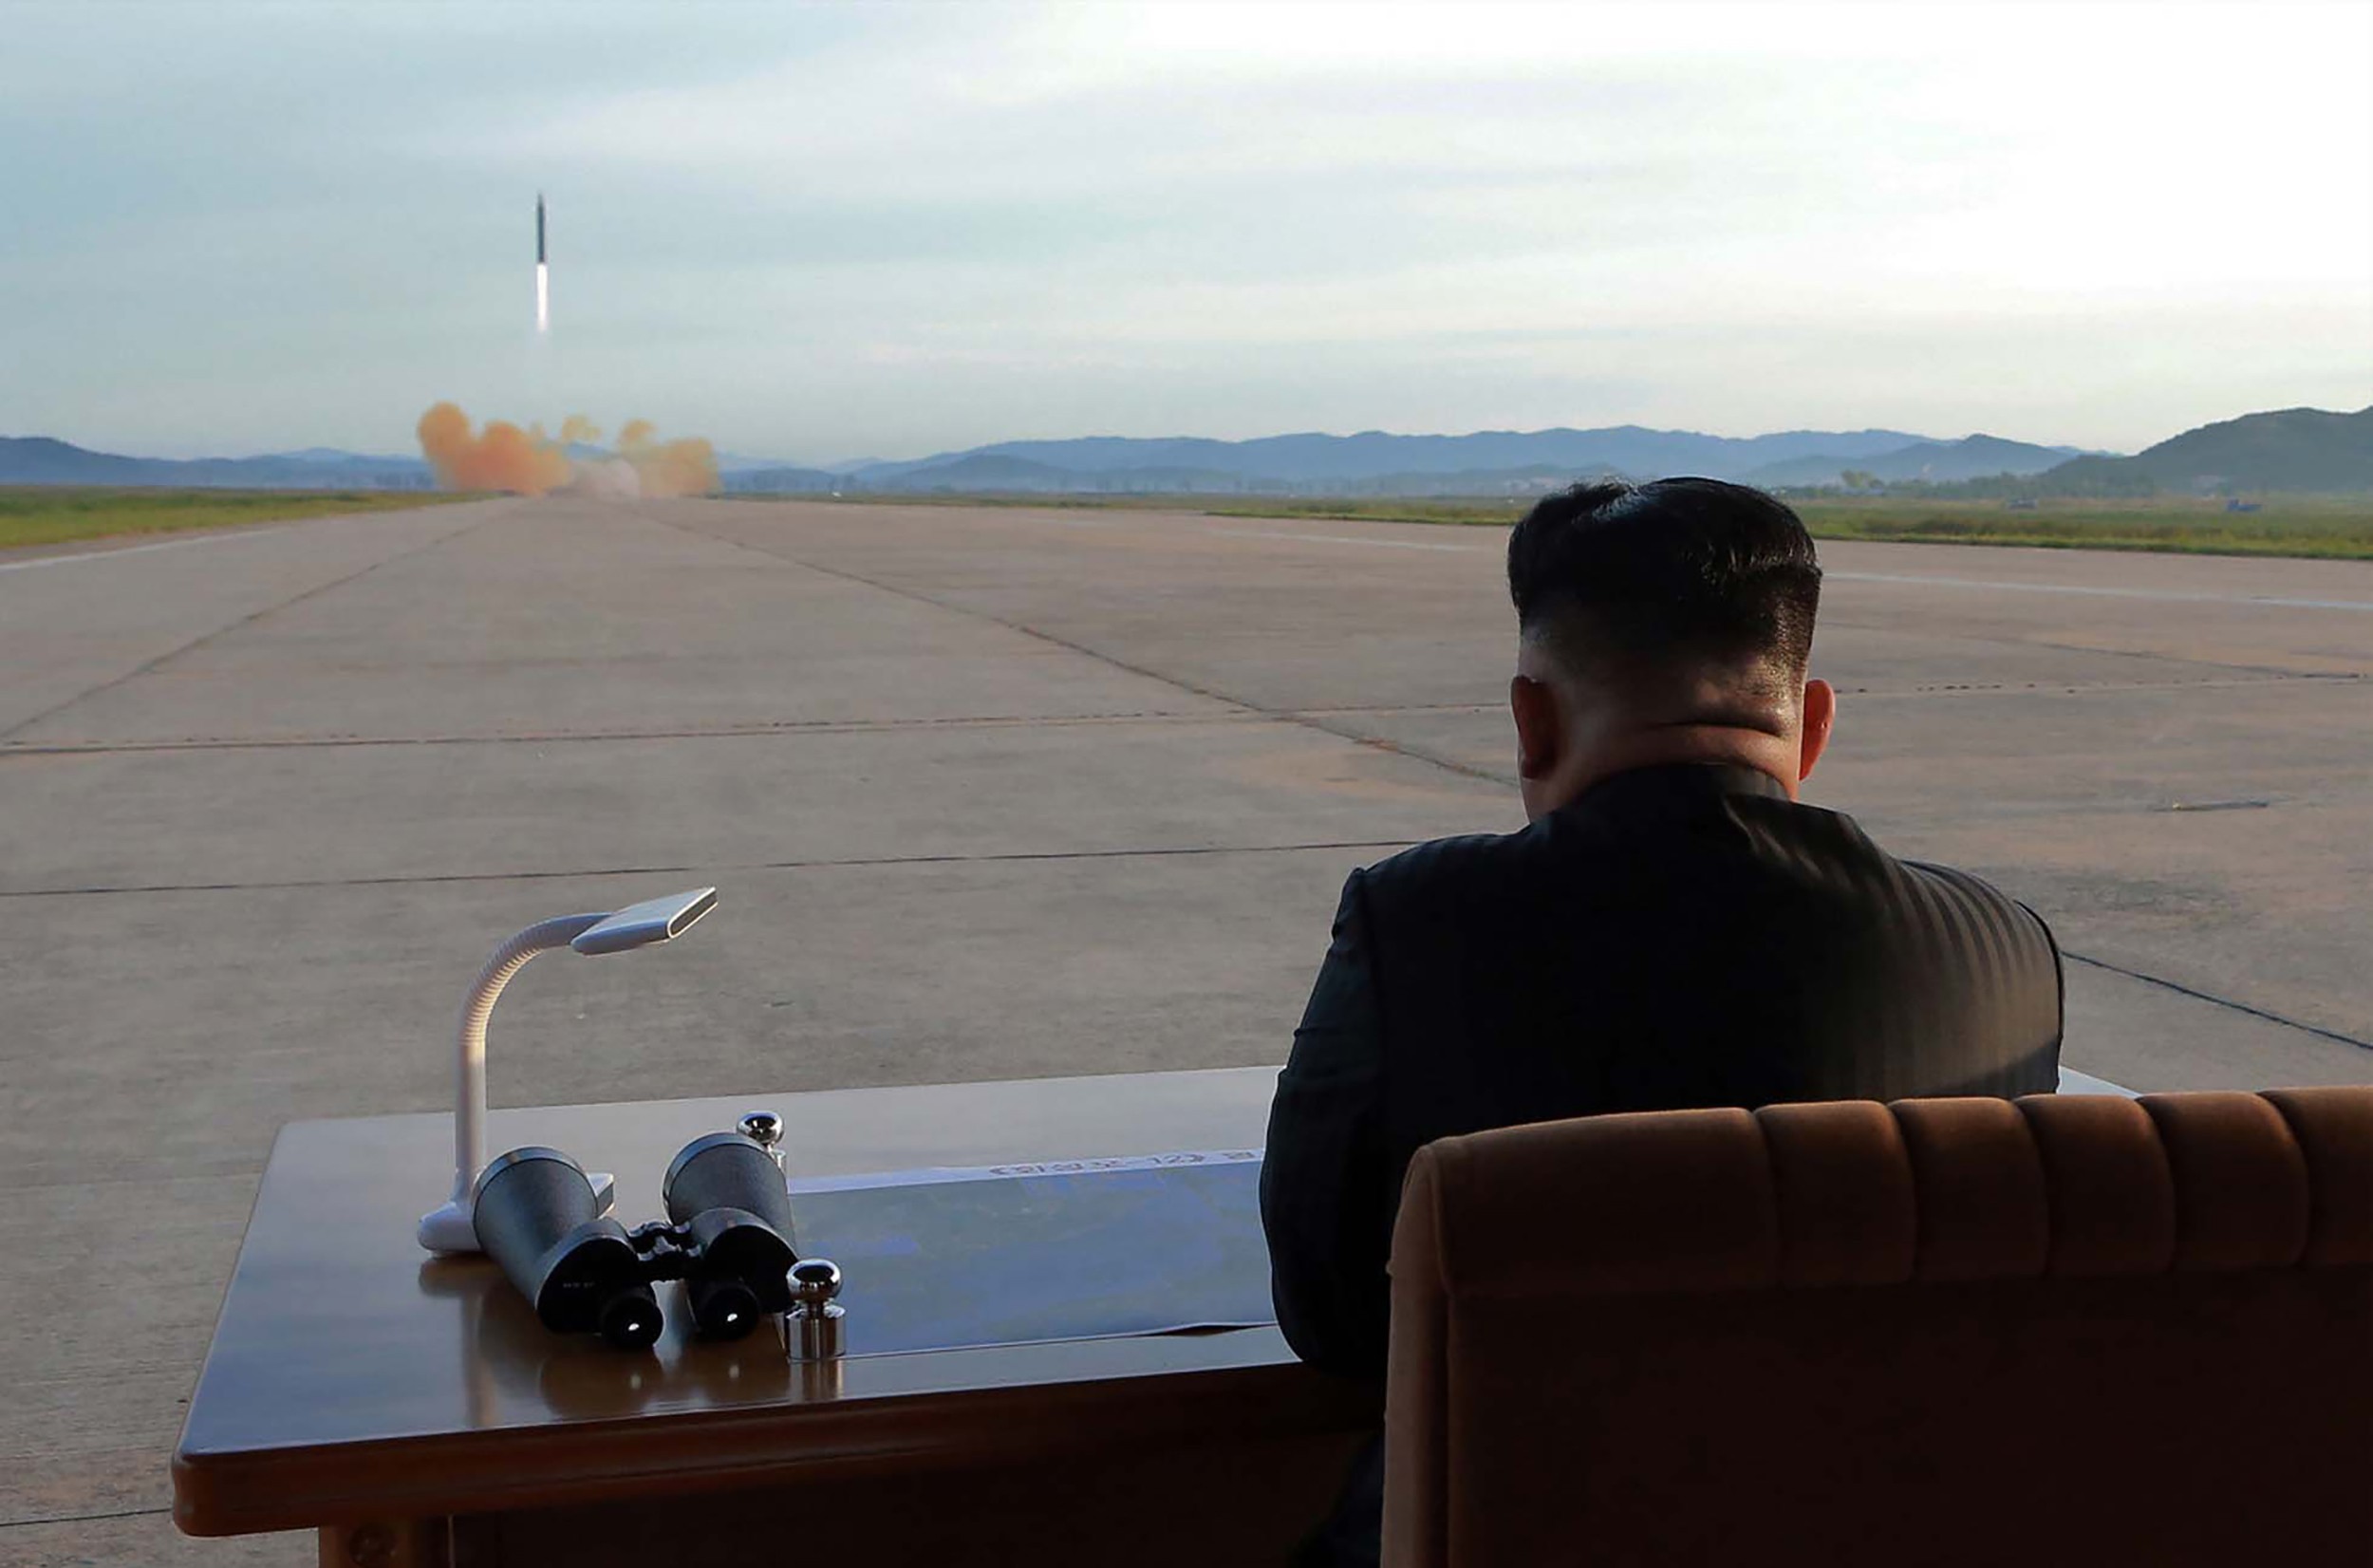 North Korean leader Kim Jong-un watches a launch drill of the strategic ballistic rocket Hwasong-12 in a photo released by Korean Central News in September 2017. Photo: KCNA via AFP